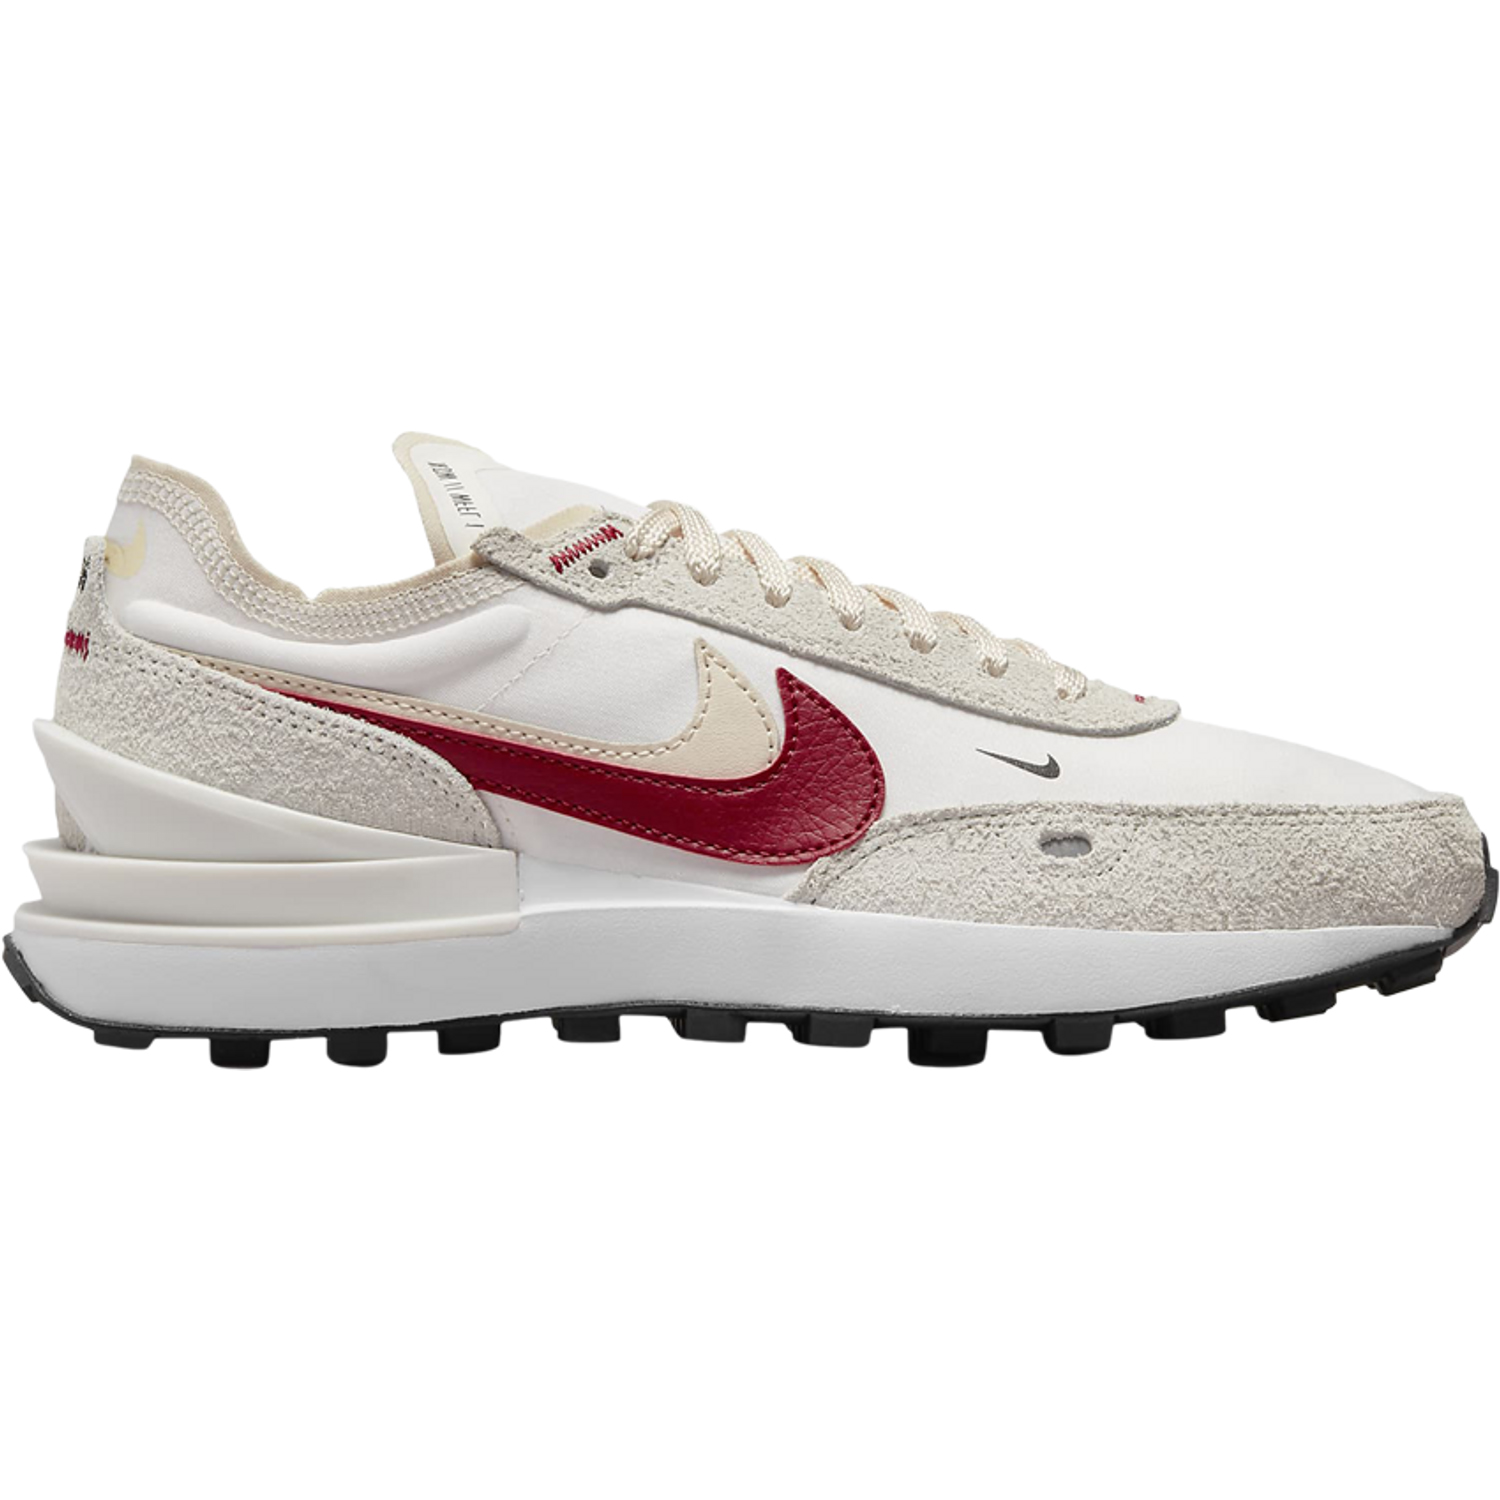 Кроссовки Nike Wmns Waffle One SE, белый кроссовки nike sportswear waffle one white multicolor